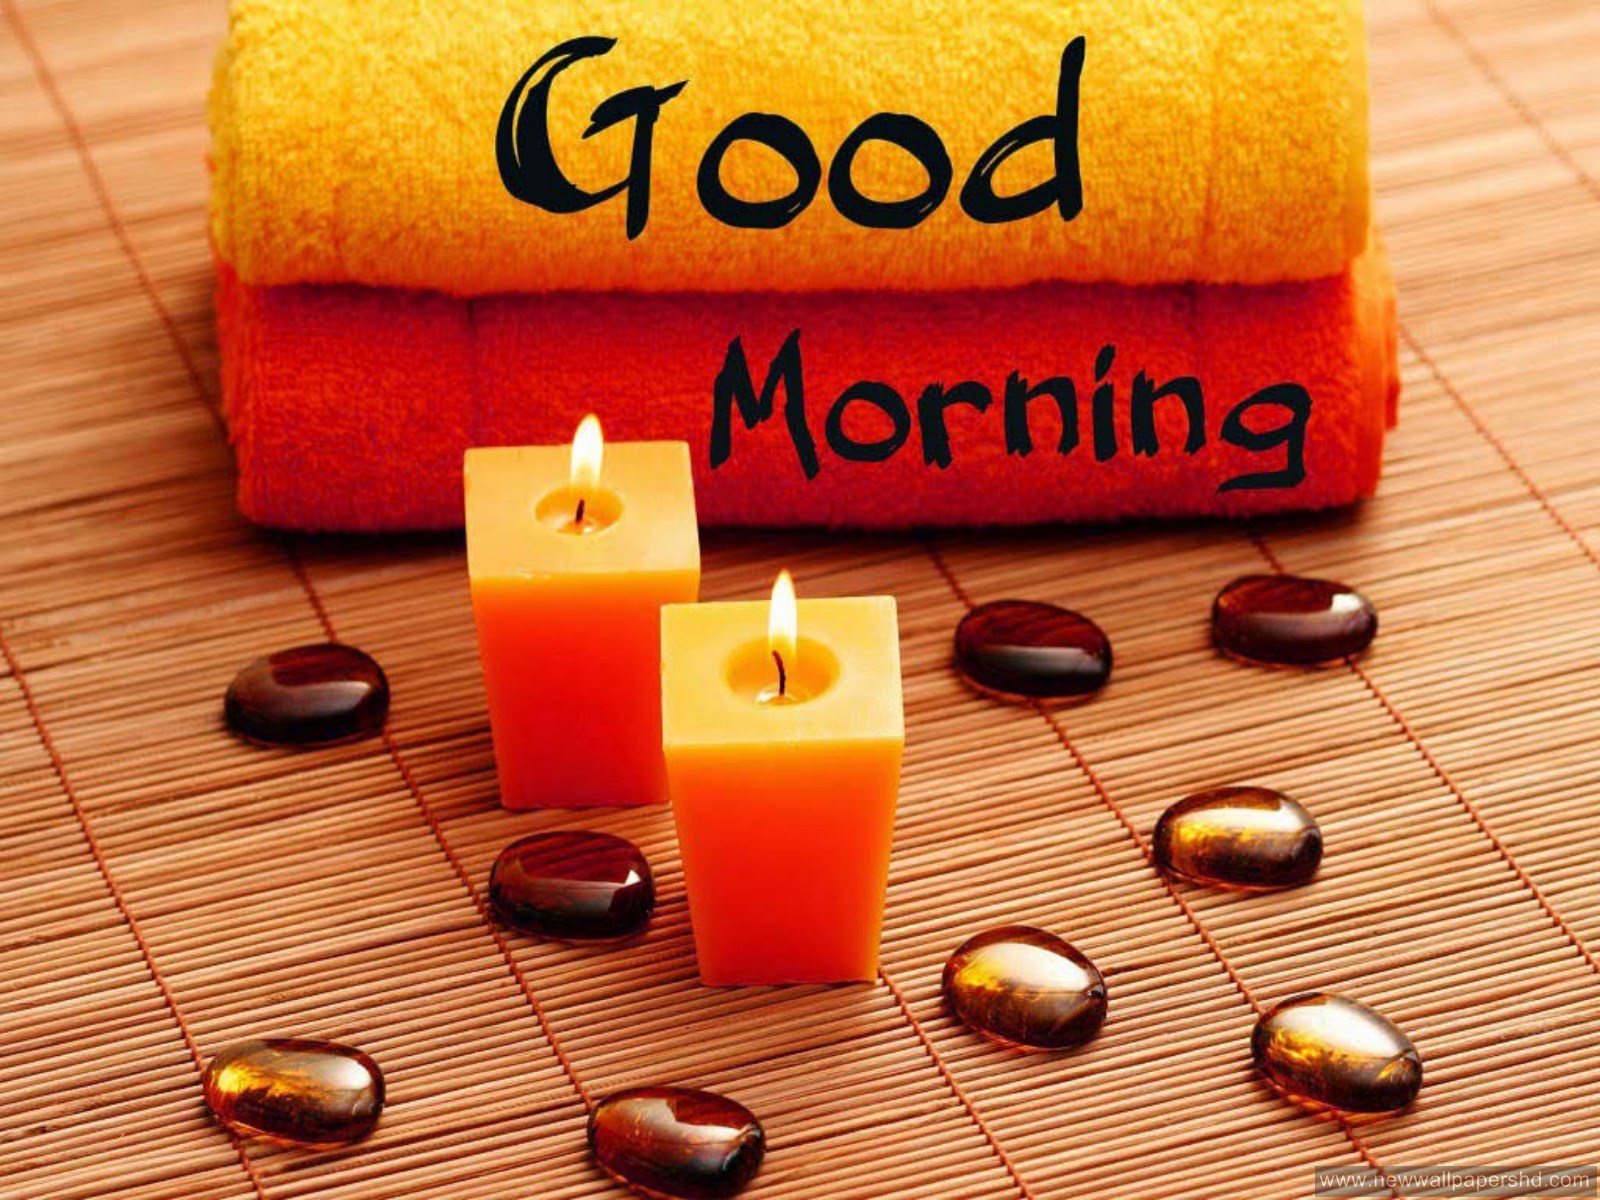 good orning wallpapers images